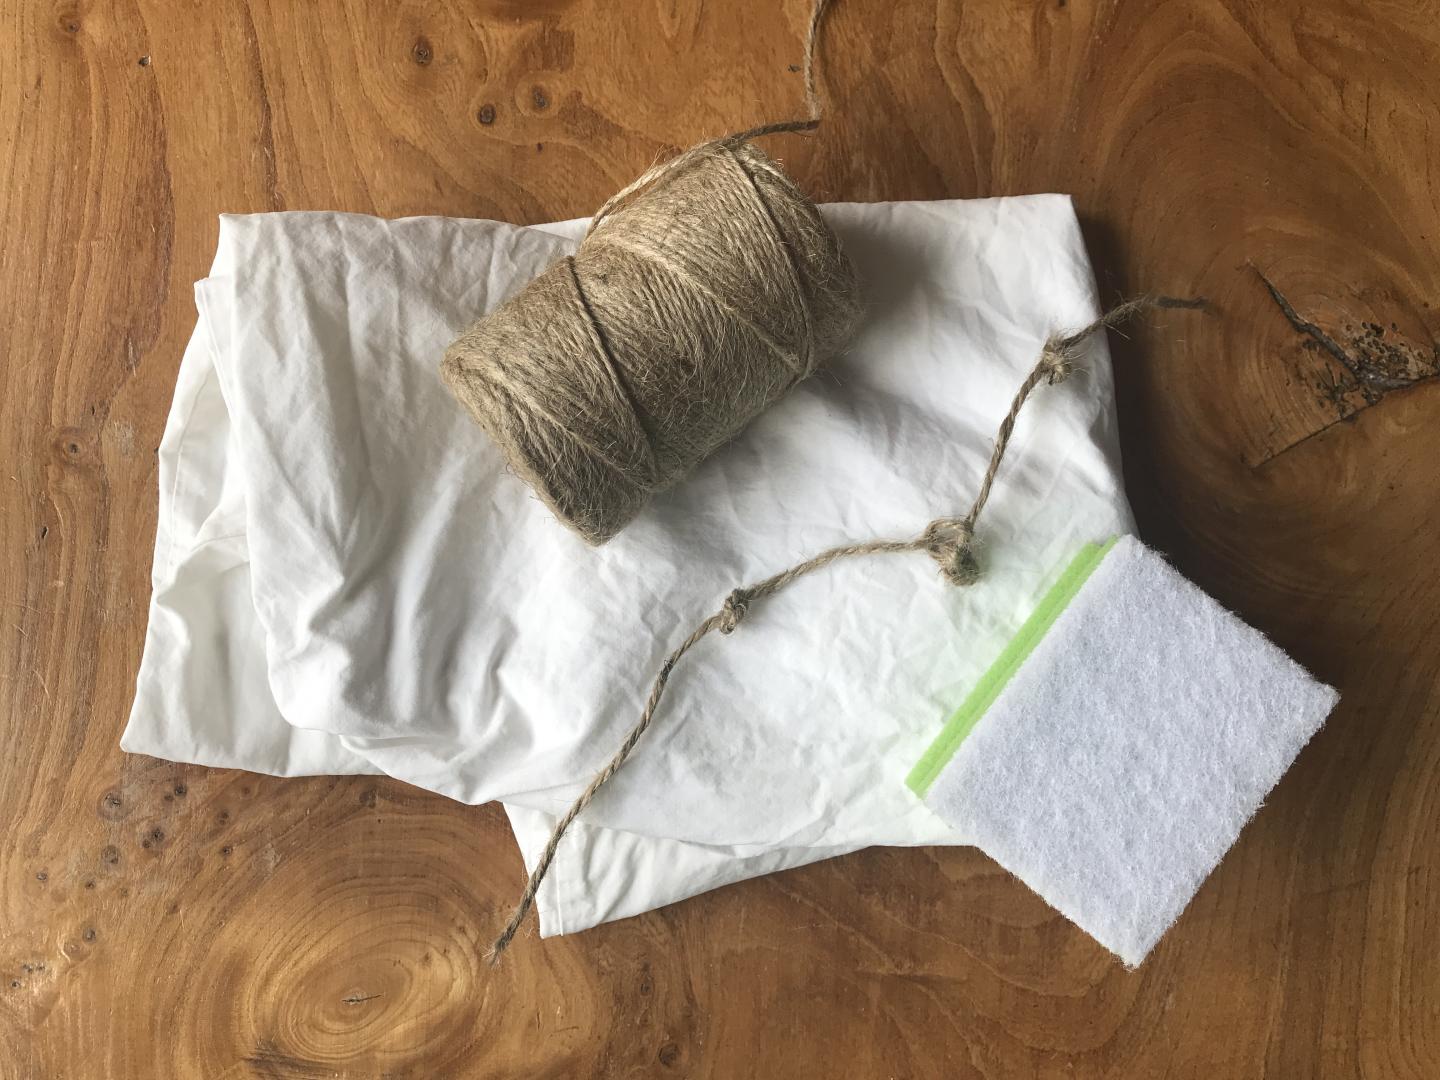 A pillowcase with a roll of string, sponge and piece of string with knots tied into it.